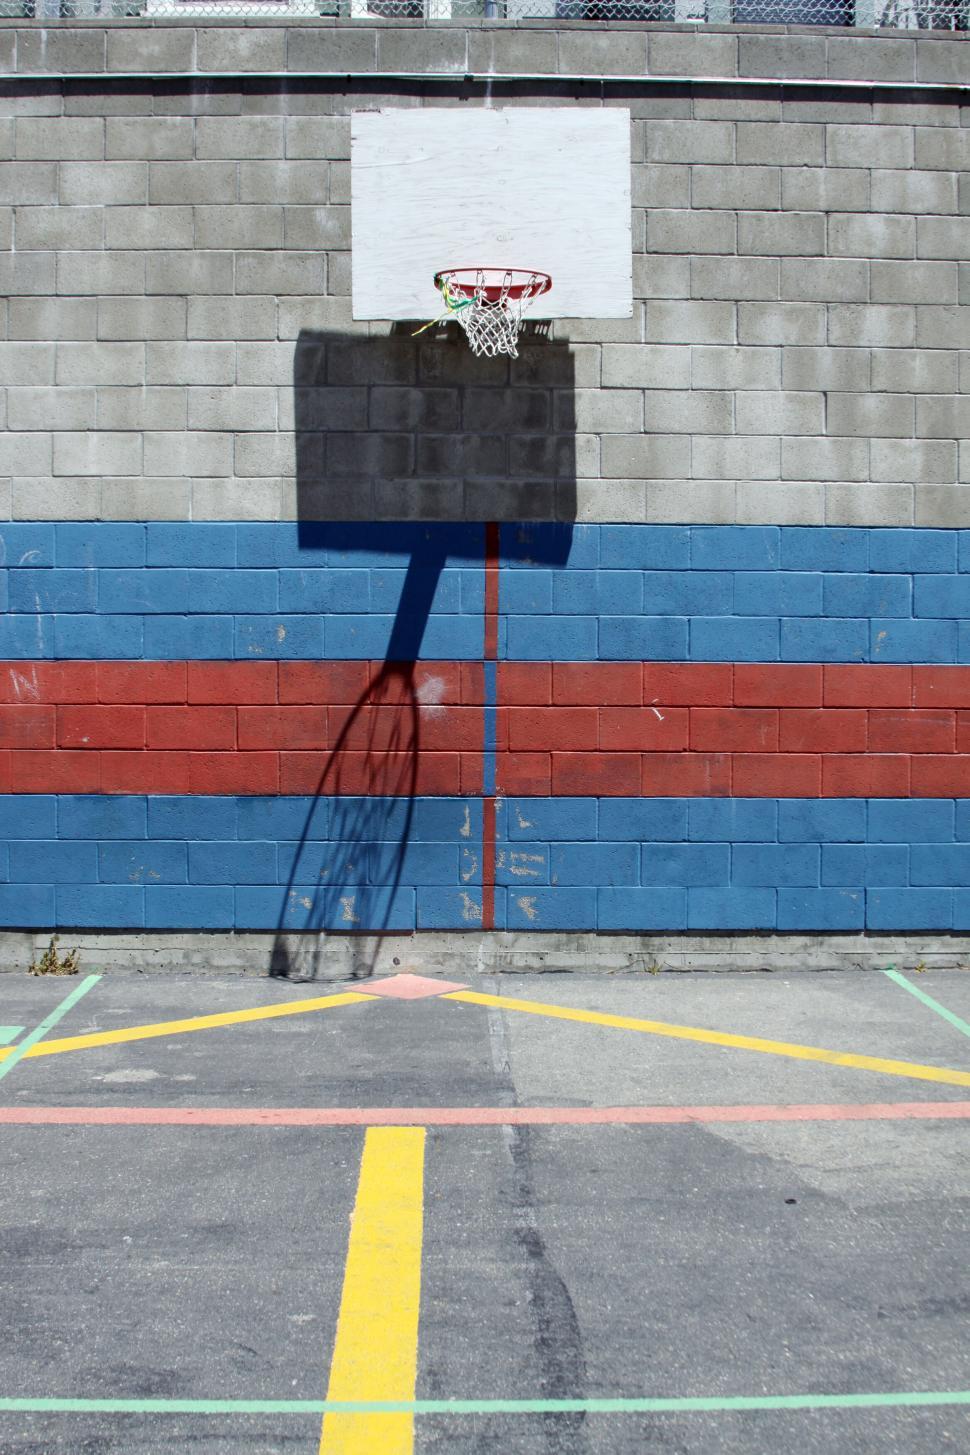 Free Image of Outdoor basketball hoop with shadow on wall 